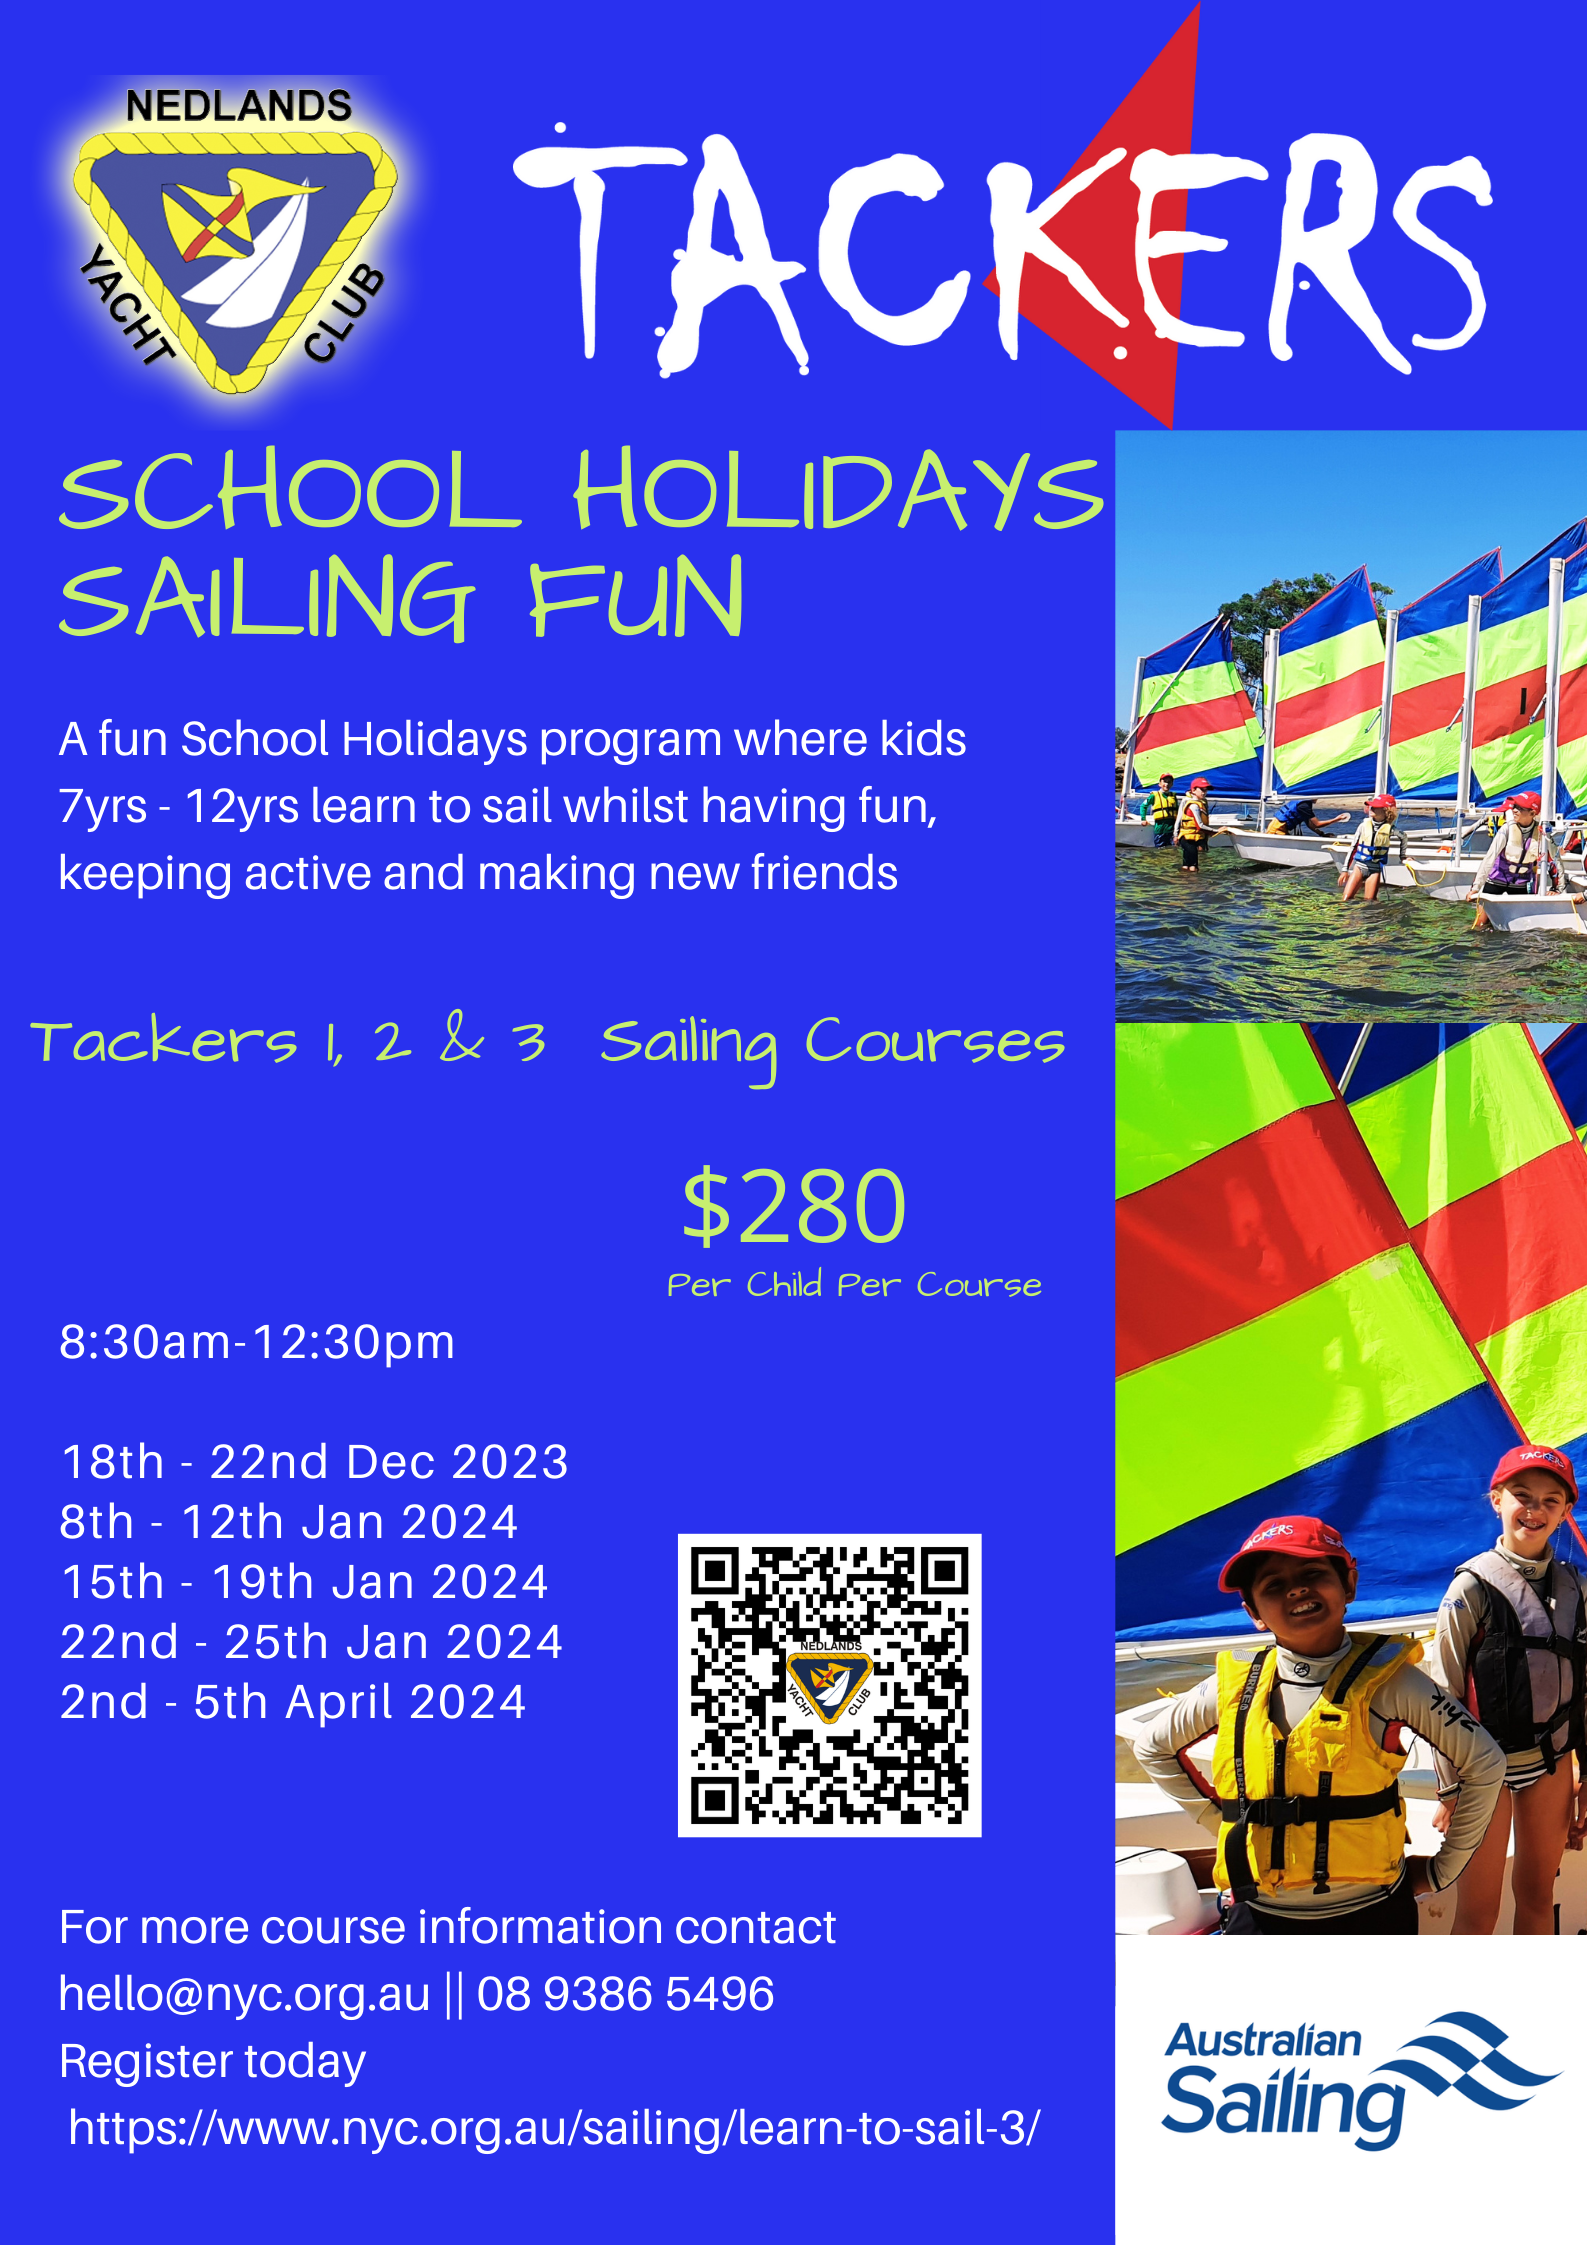 Tackers 1: Having Fun, Sailing course for 7 to 12 year olds.